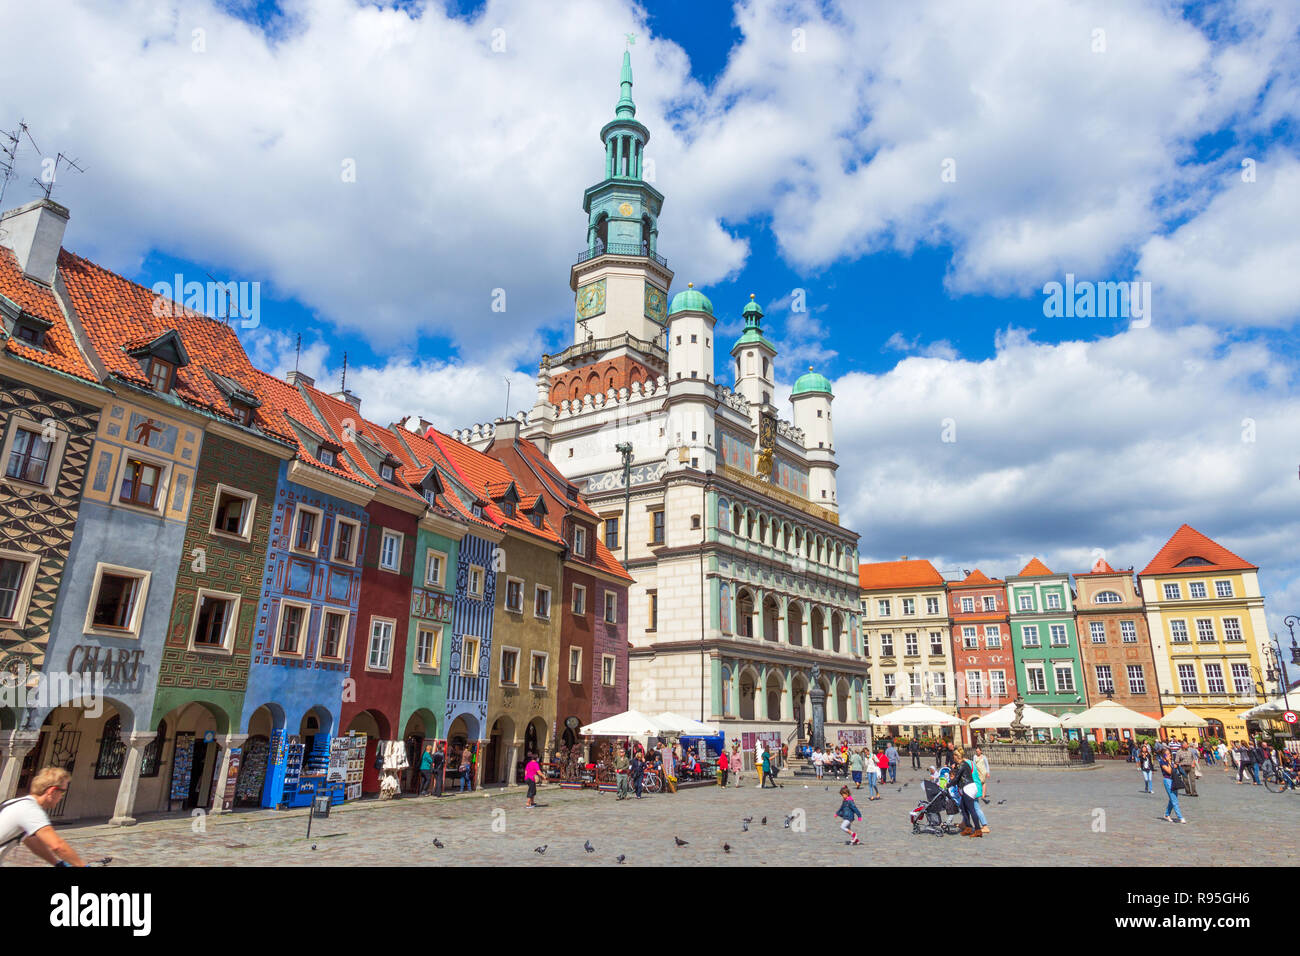 POZNAN, POLAND - AUG 20, 2014: Colorfull houses on the central square in Poznan, Poland. Stock Photo